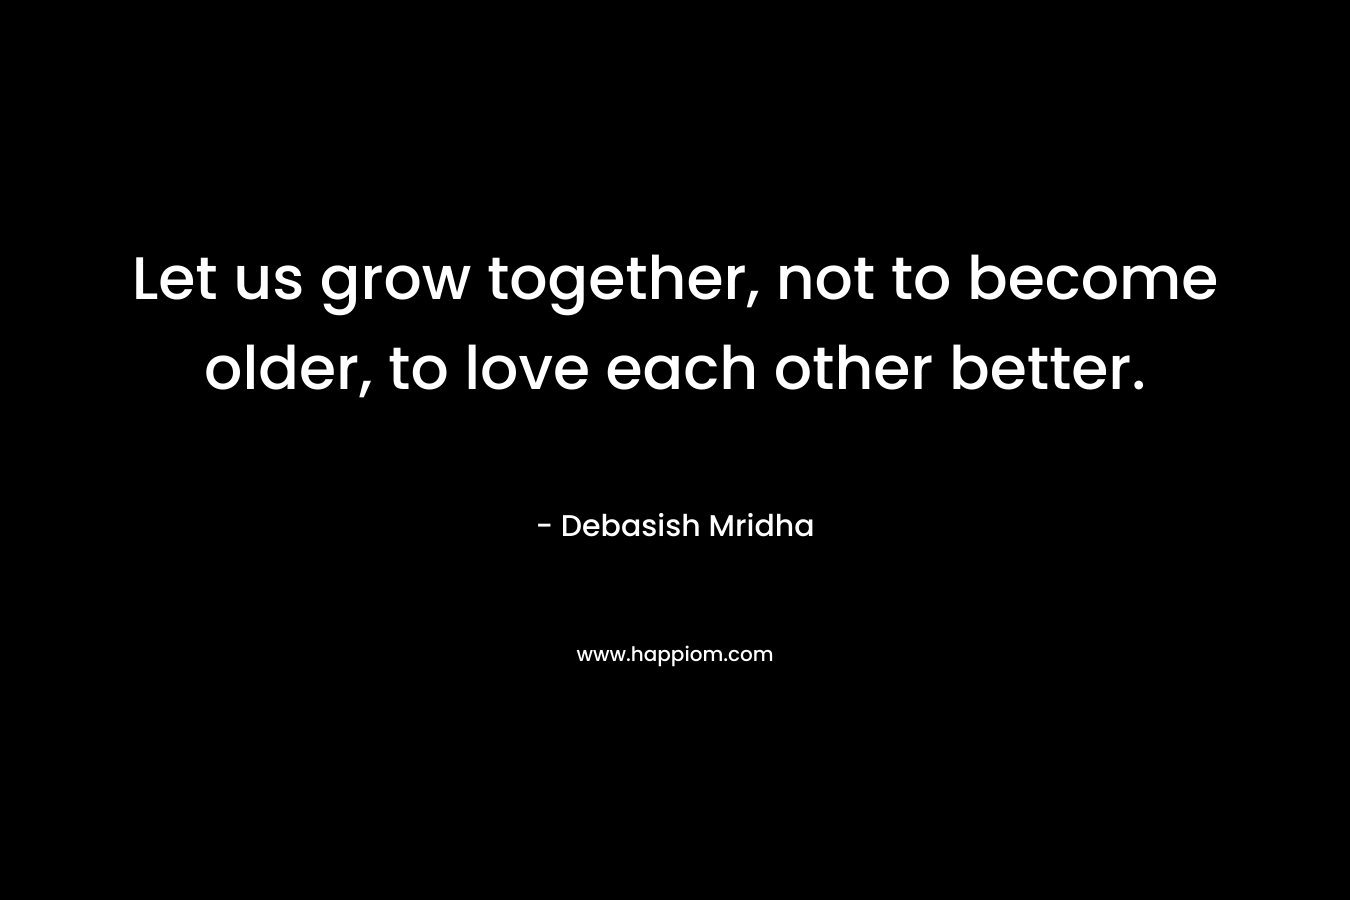 Let us grow together, not to become older, to love each other better.